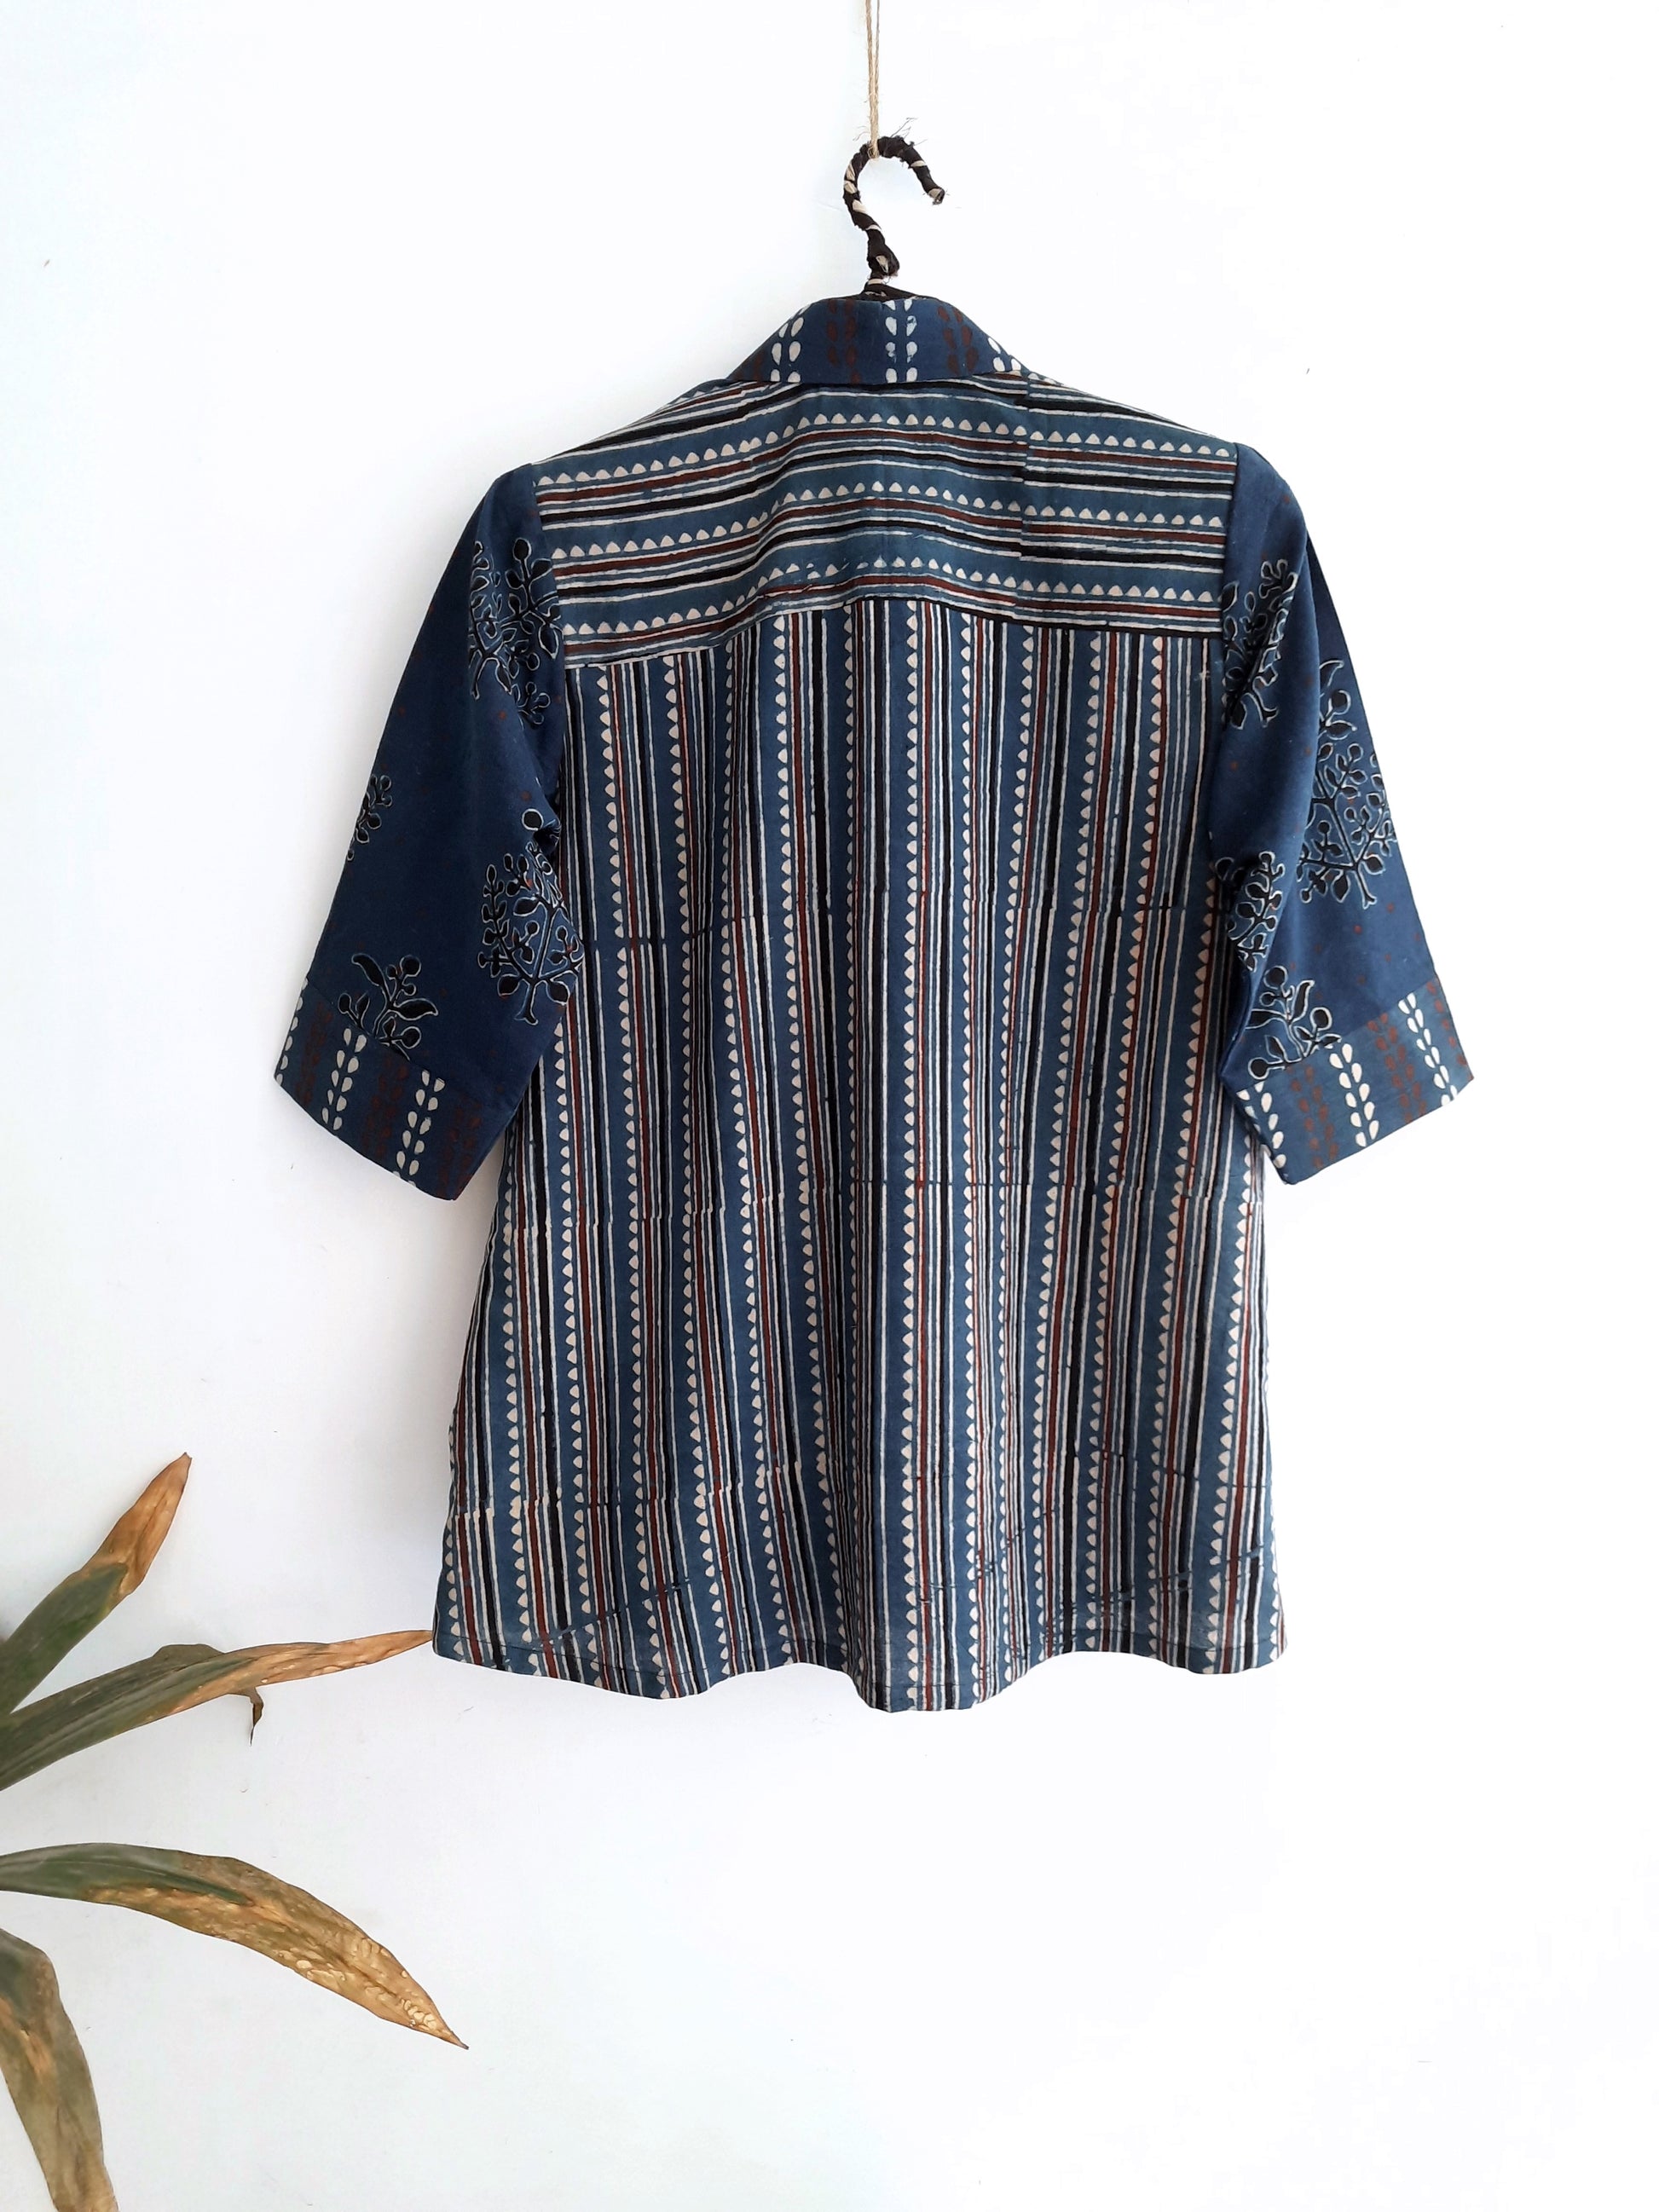 Image: Breezy Indigo Ajrakh Fusion shirt for women, featuring hand block prints in polkas, bootas, and stripes. Crafted with care, this indigo dyed shirt adds artisanal charm to any wardrobe. Shop now at Turquoisethestore.